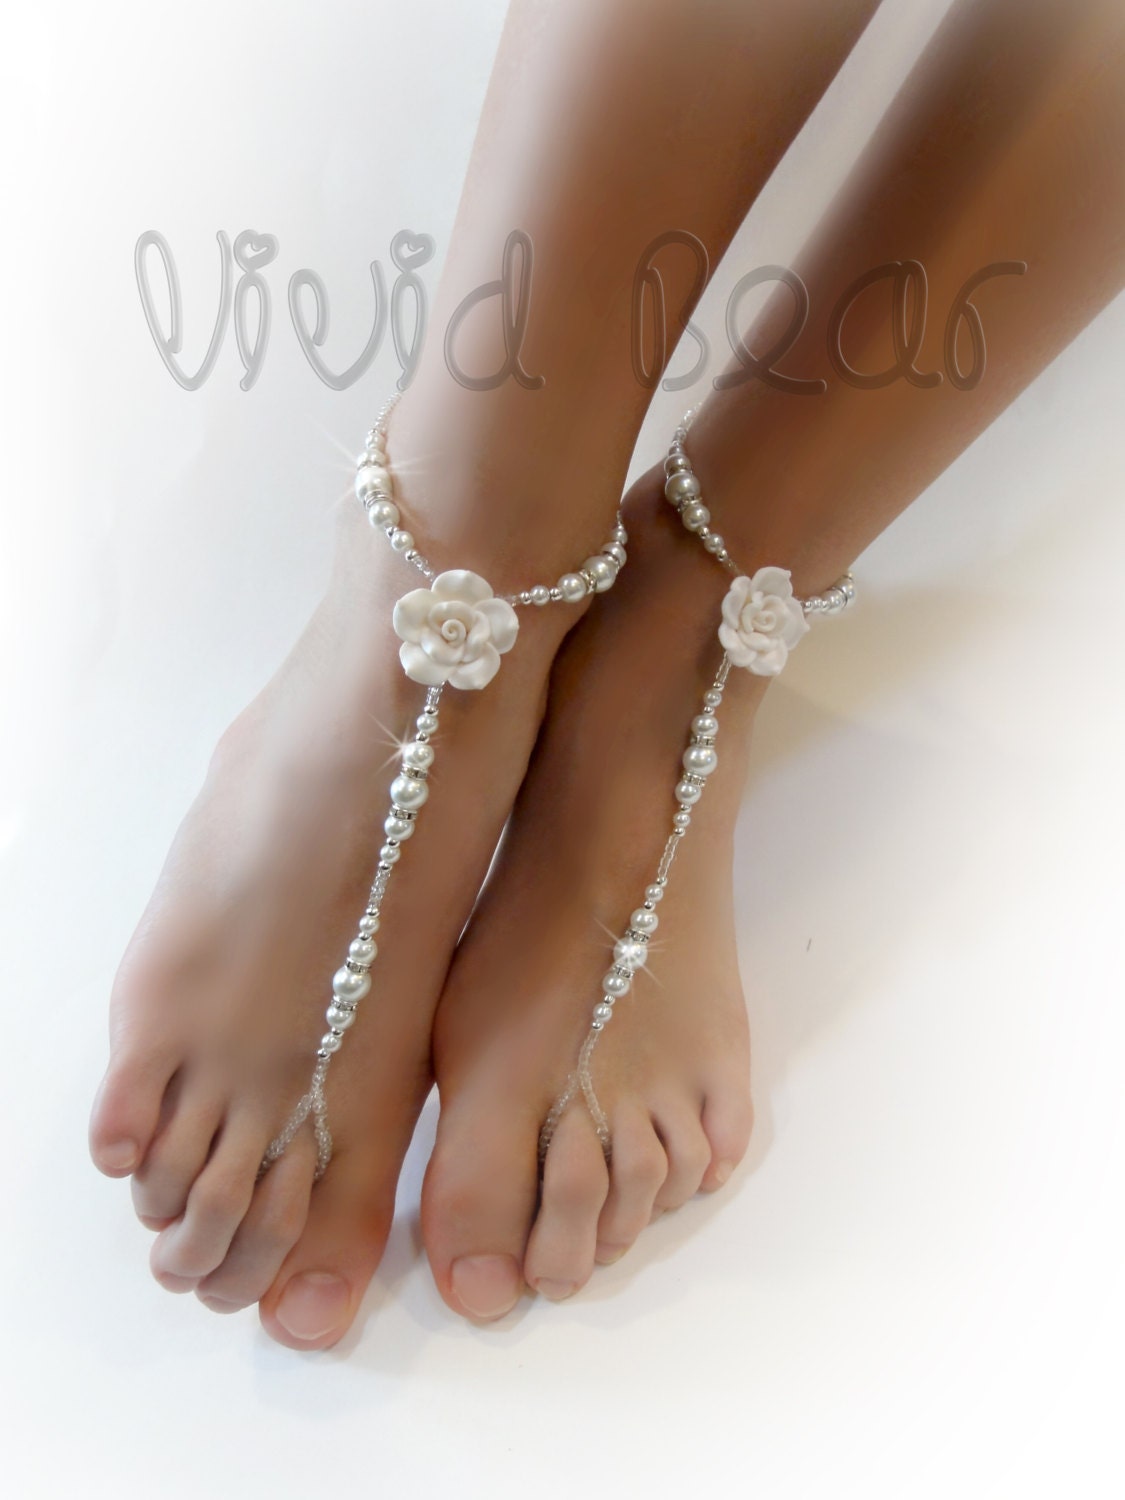 Wedding Beaded Barefoot Sandals. Foot Jewelry. Anklets. White